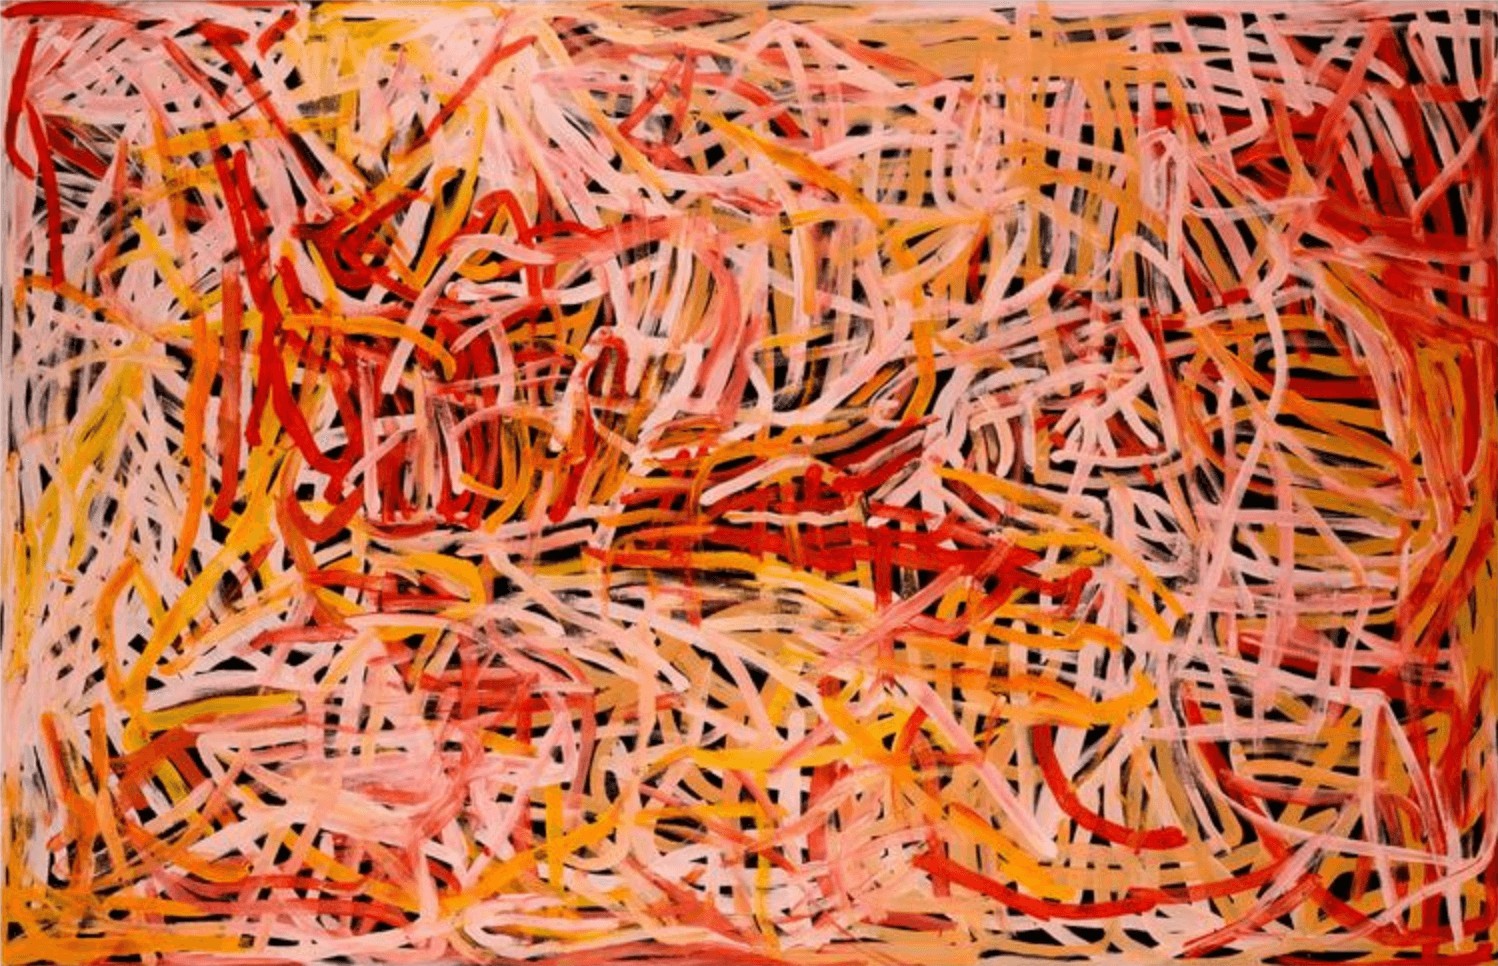 Let’s Fall in Love With The Art of Emily Kame Kngwarreye